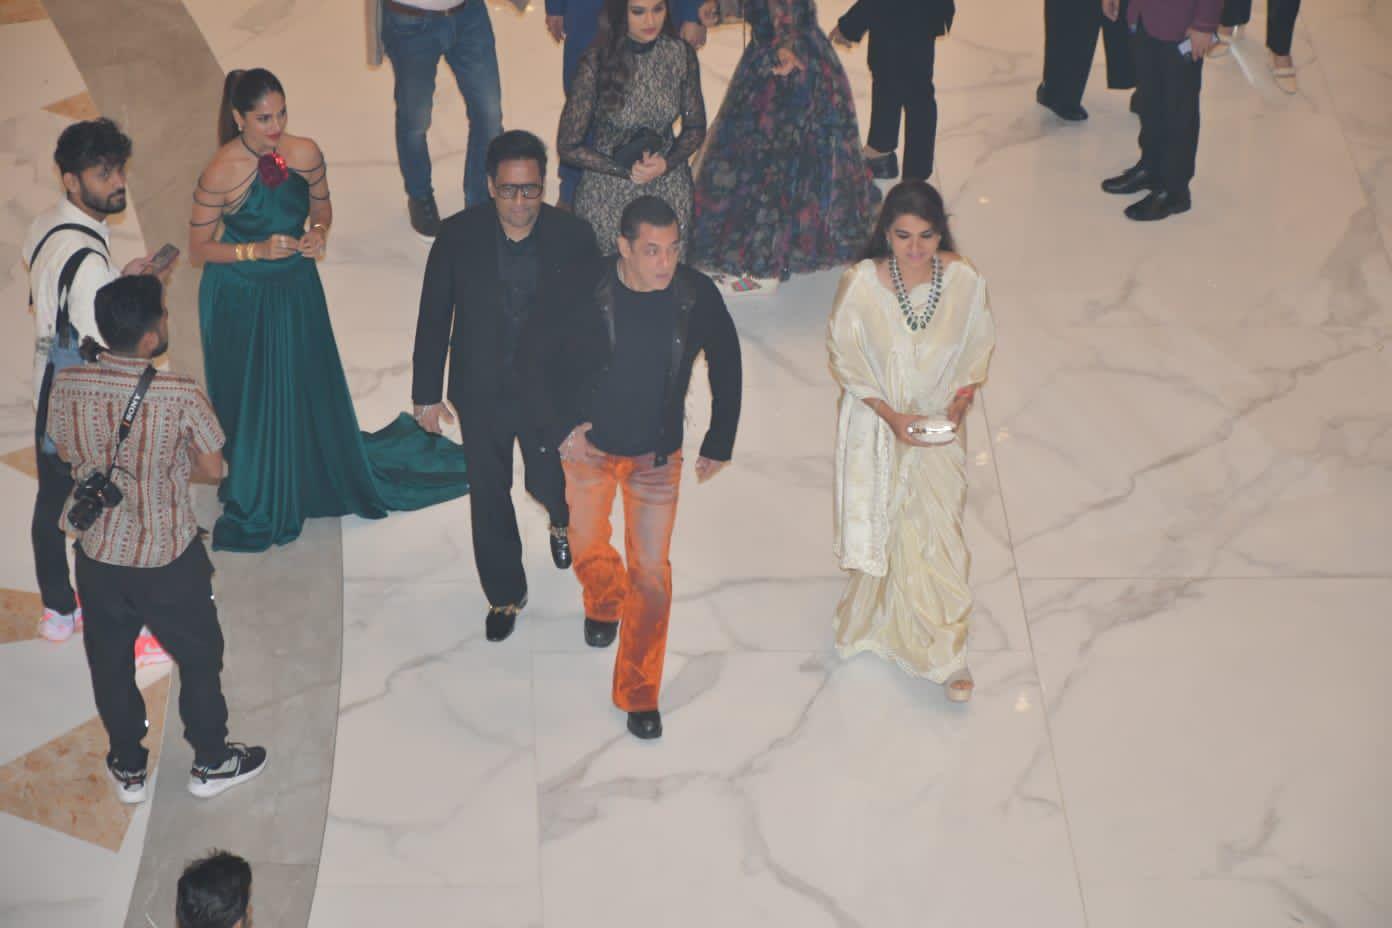 Salman Khan was also there at the event. Although the actor did not pose on the red carpet, this visual of him was unmistakable.